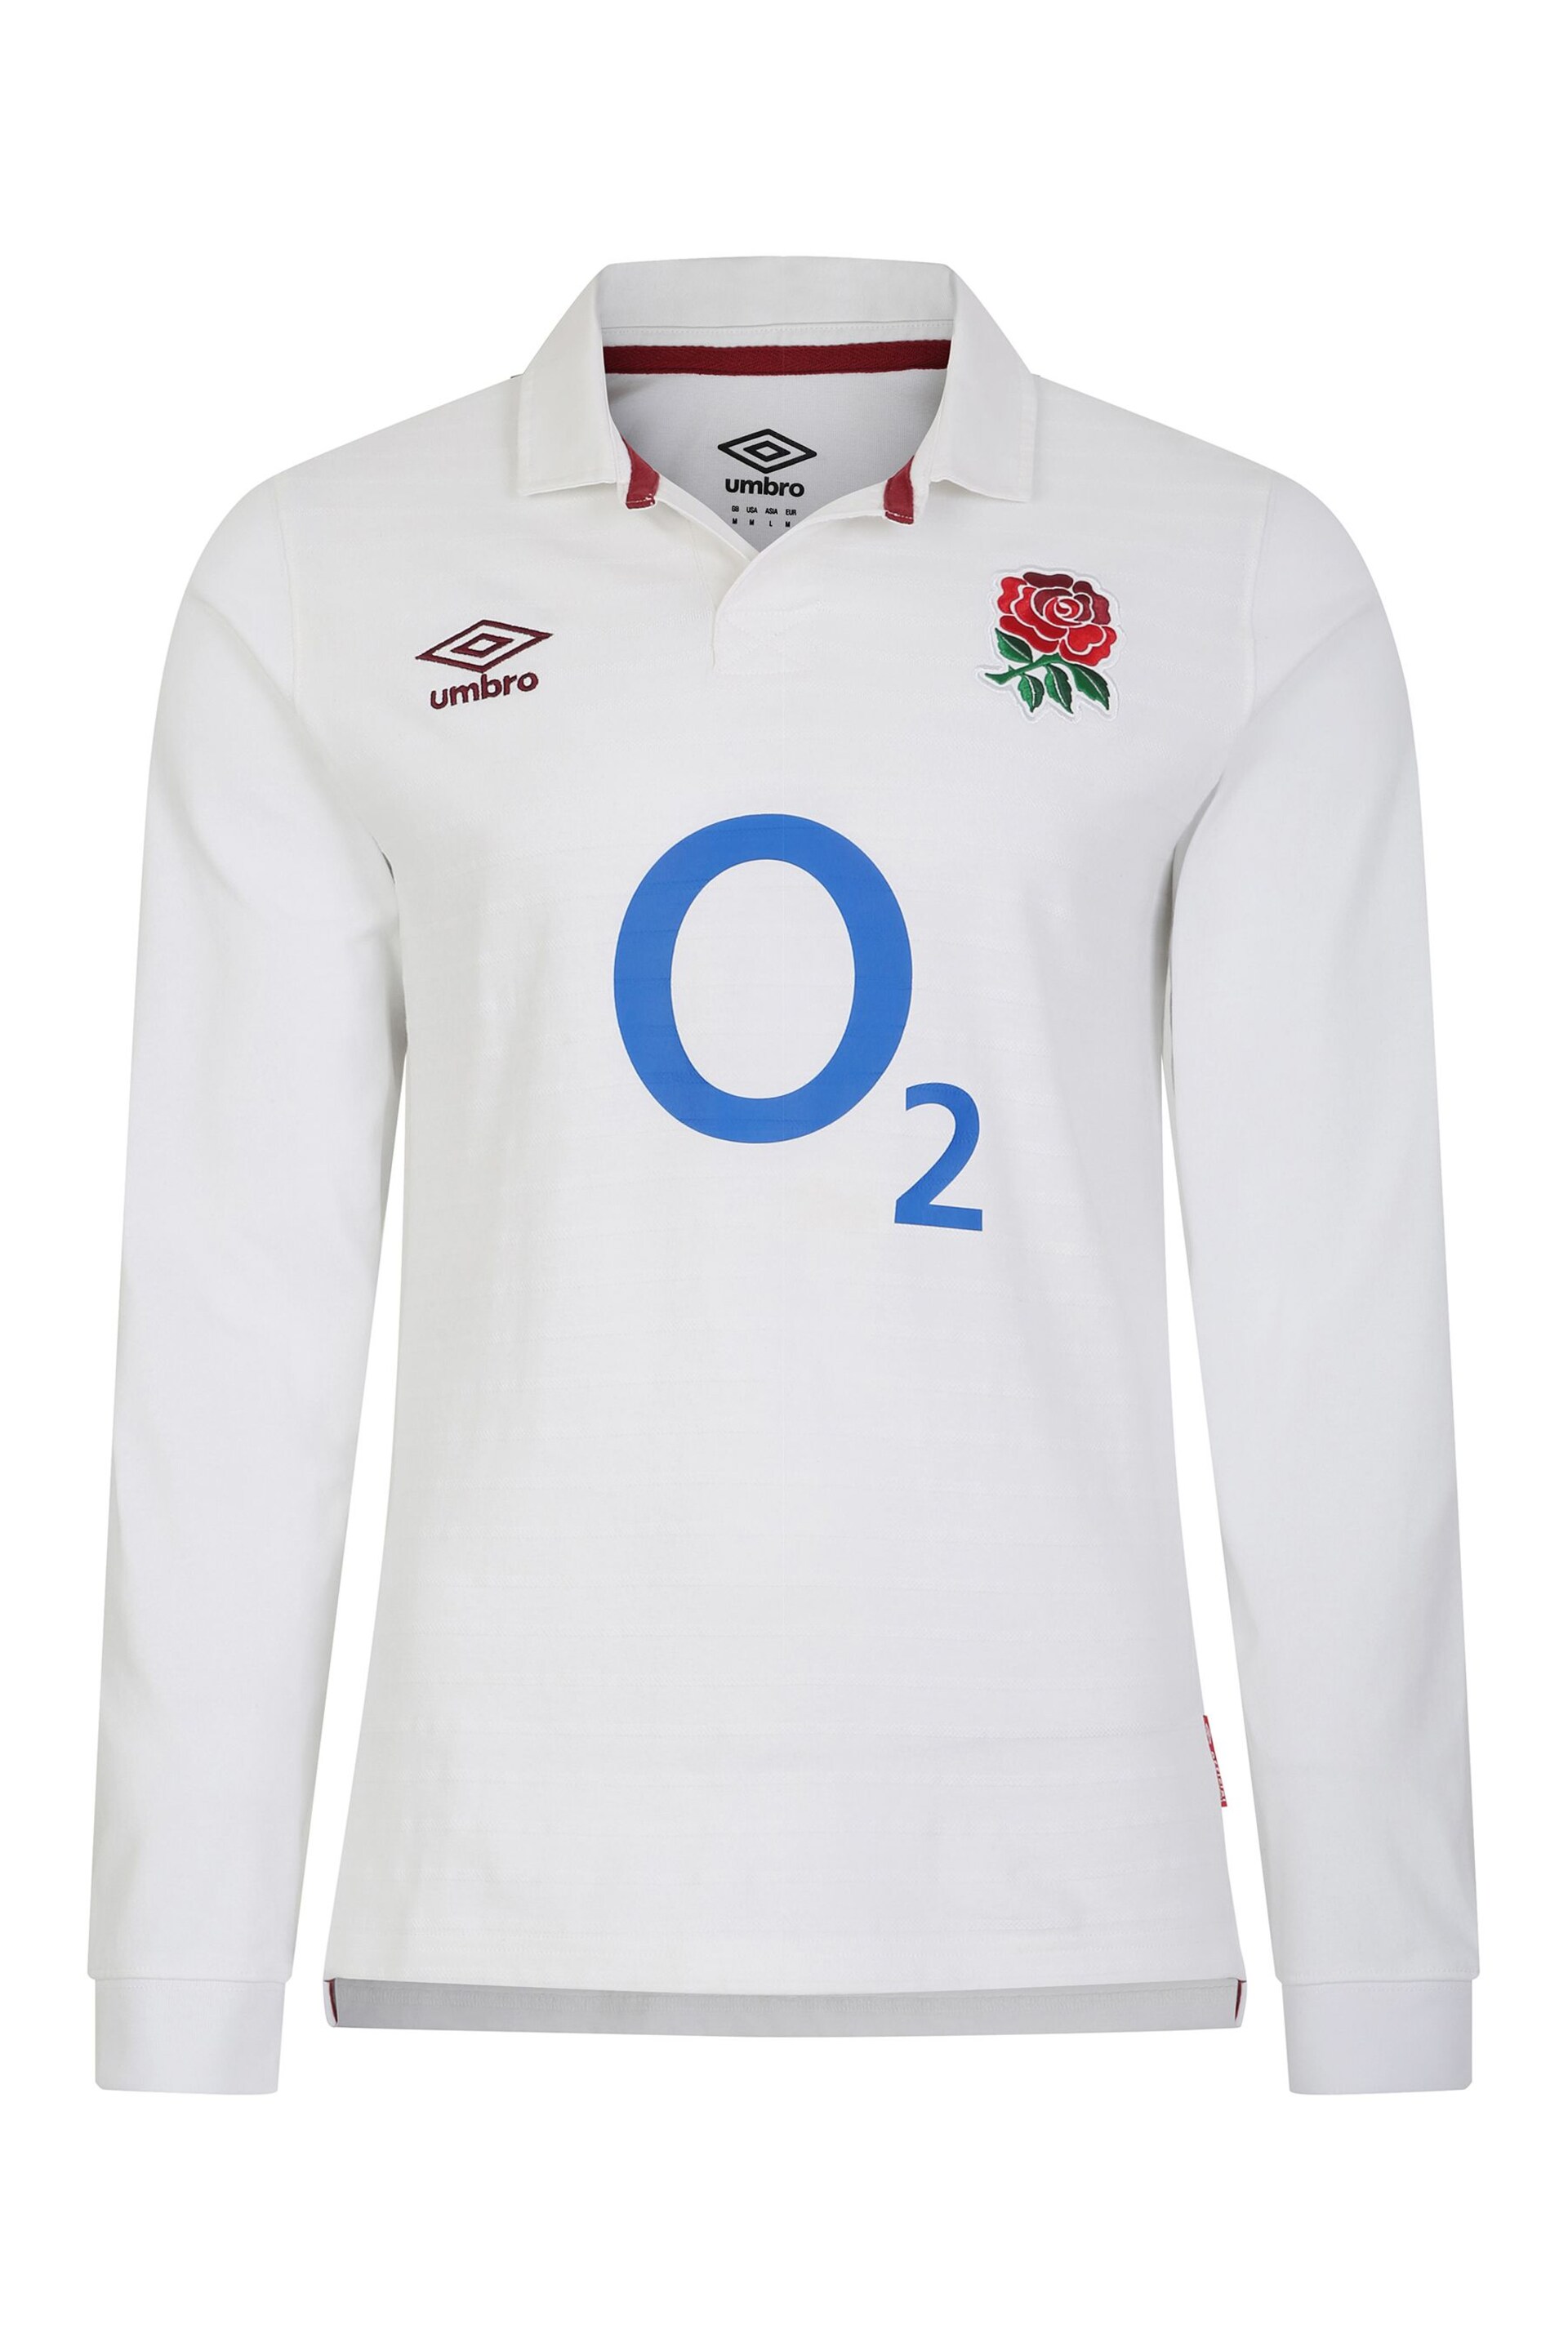 Umbro Off White England Home Classic Rugby Jersey - Image 1 of 1